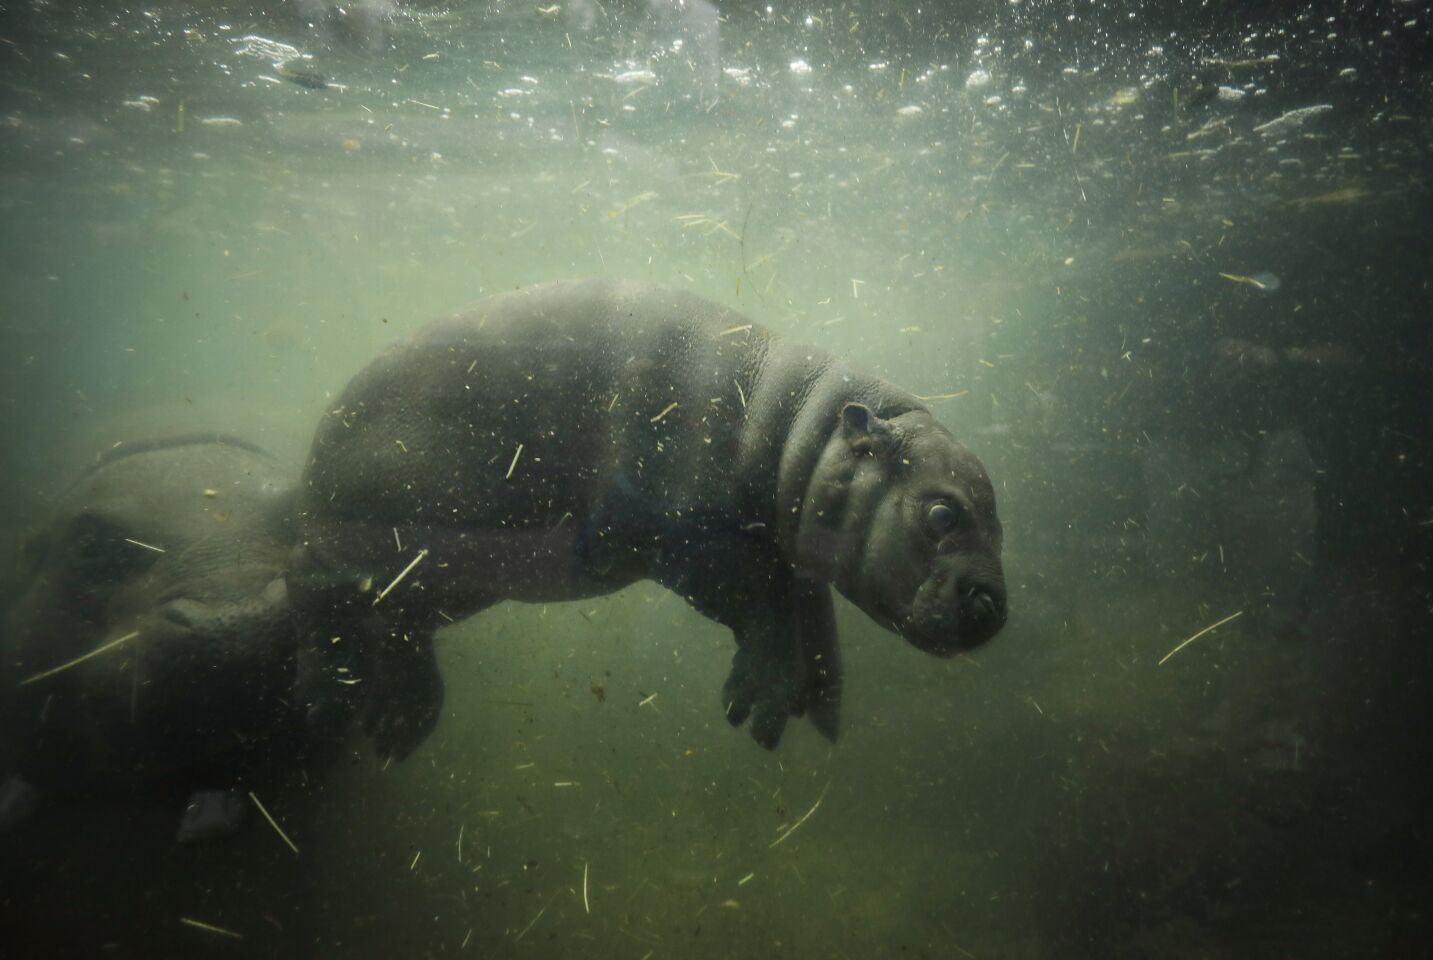 Akobi, a 40-pound, 67 day-old pygmy swims in the water at the San Diego Zoo on June 15, 2020. Akobi was introduced to the public for the first time as it explored the main exhibit for the first time Monday.